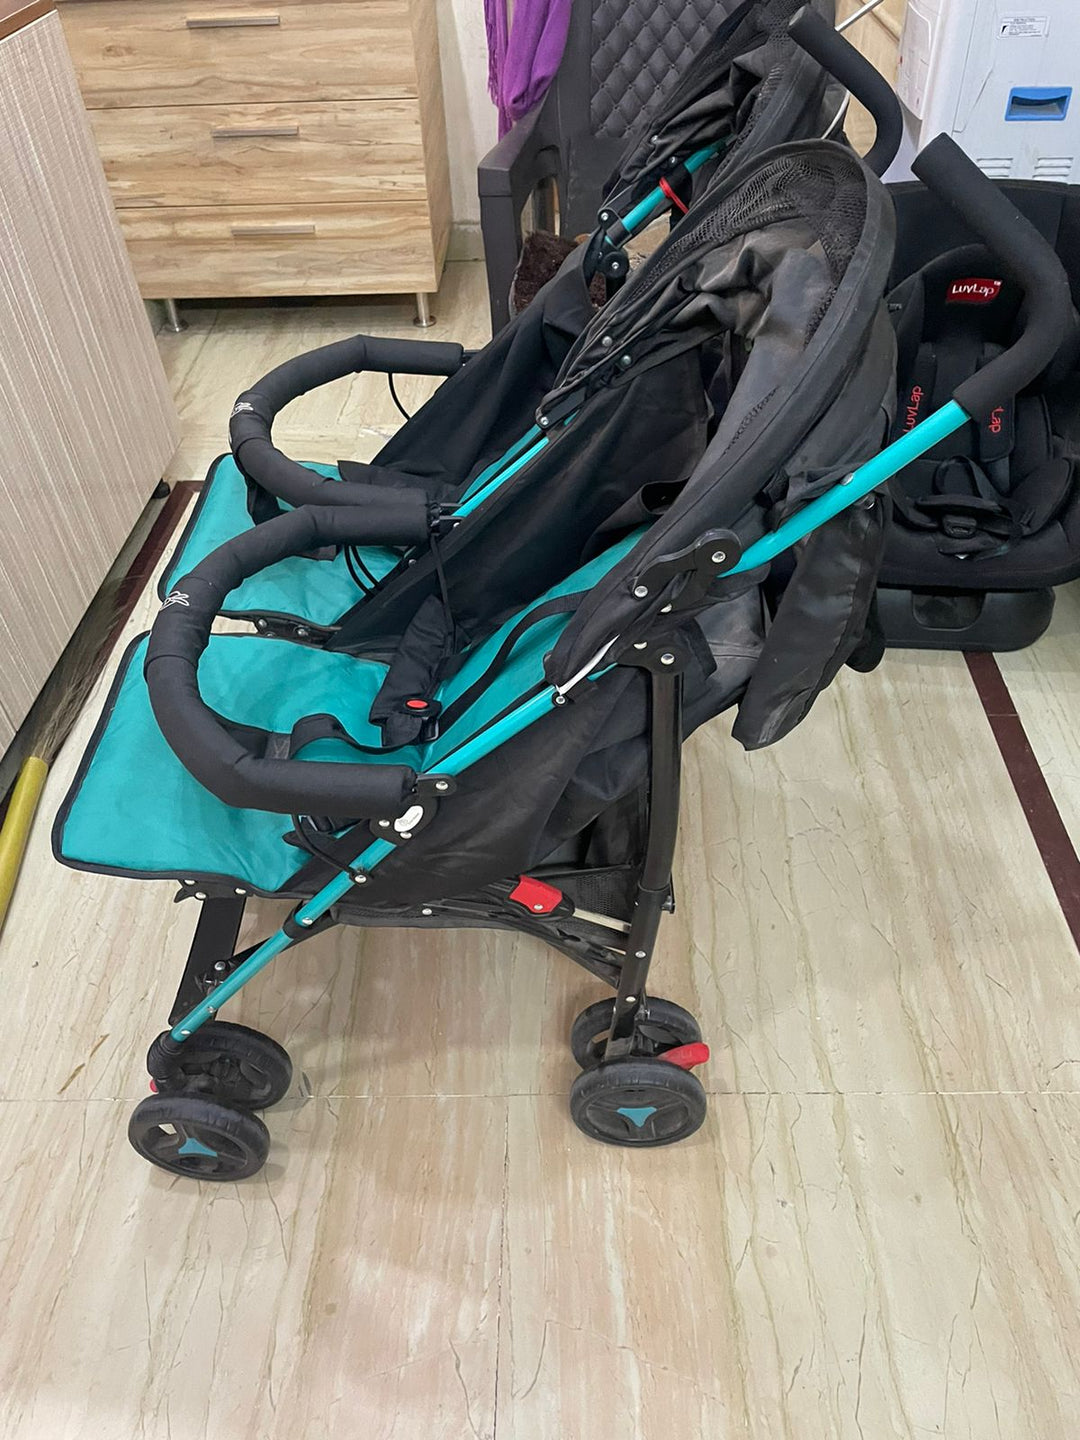 R for Rabbit Ginny and Johnny Baby Twin Stroller